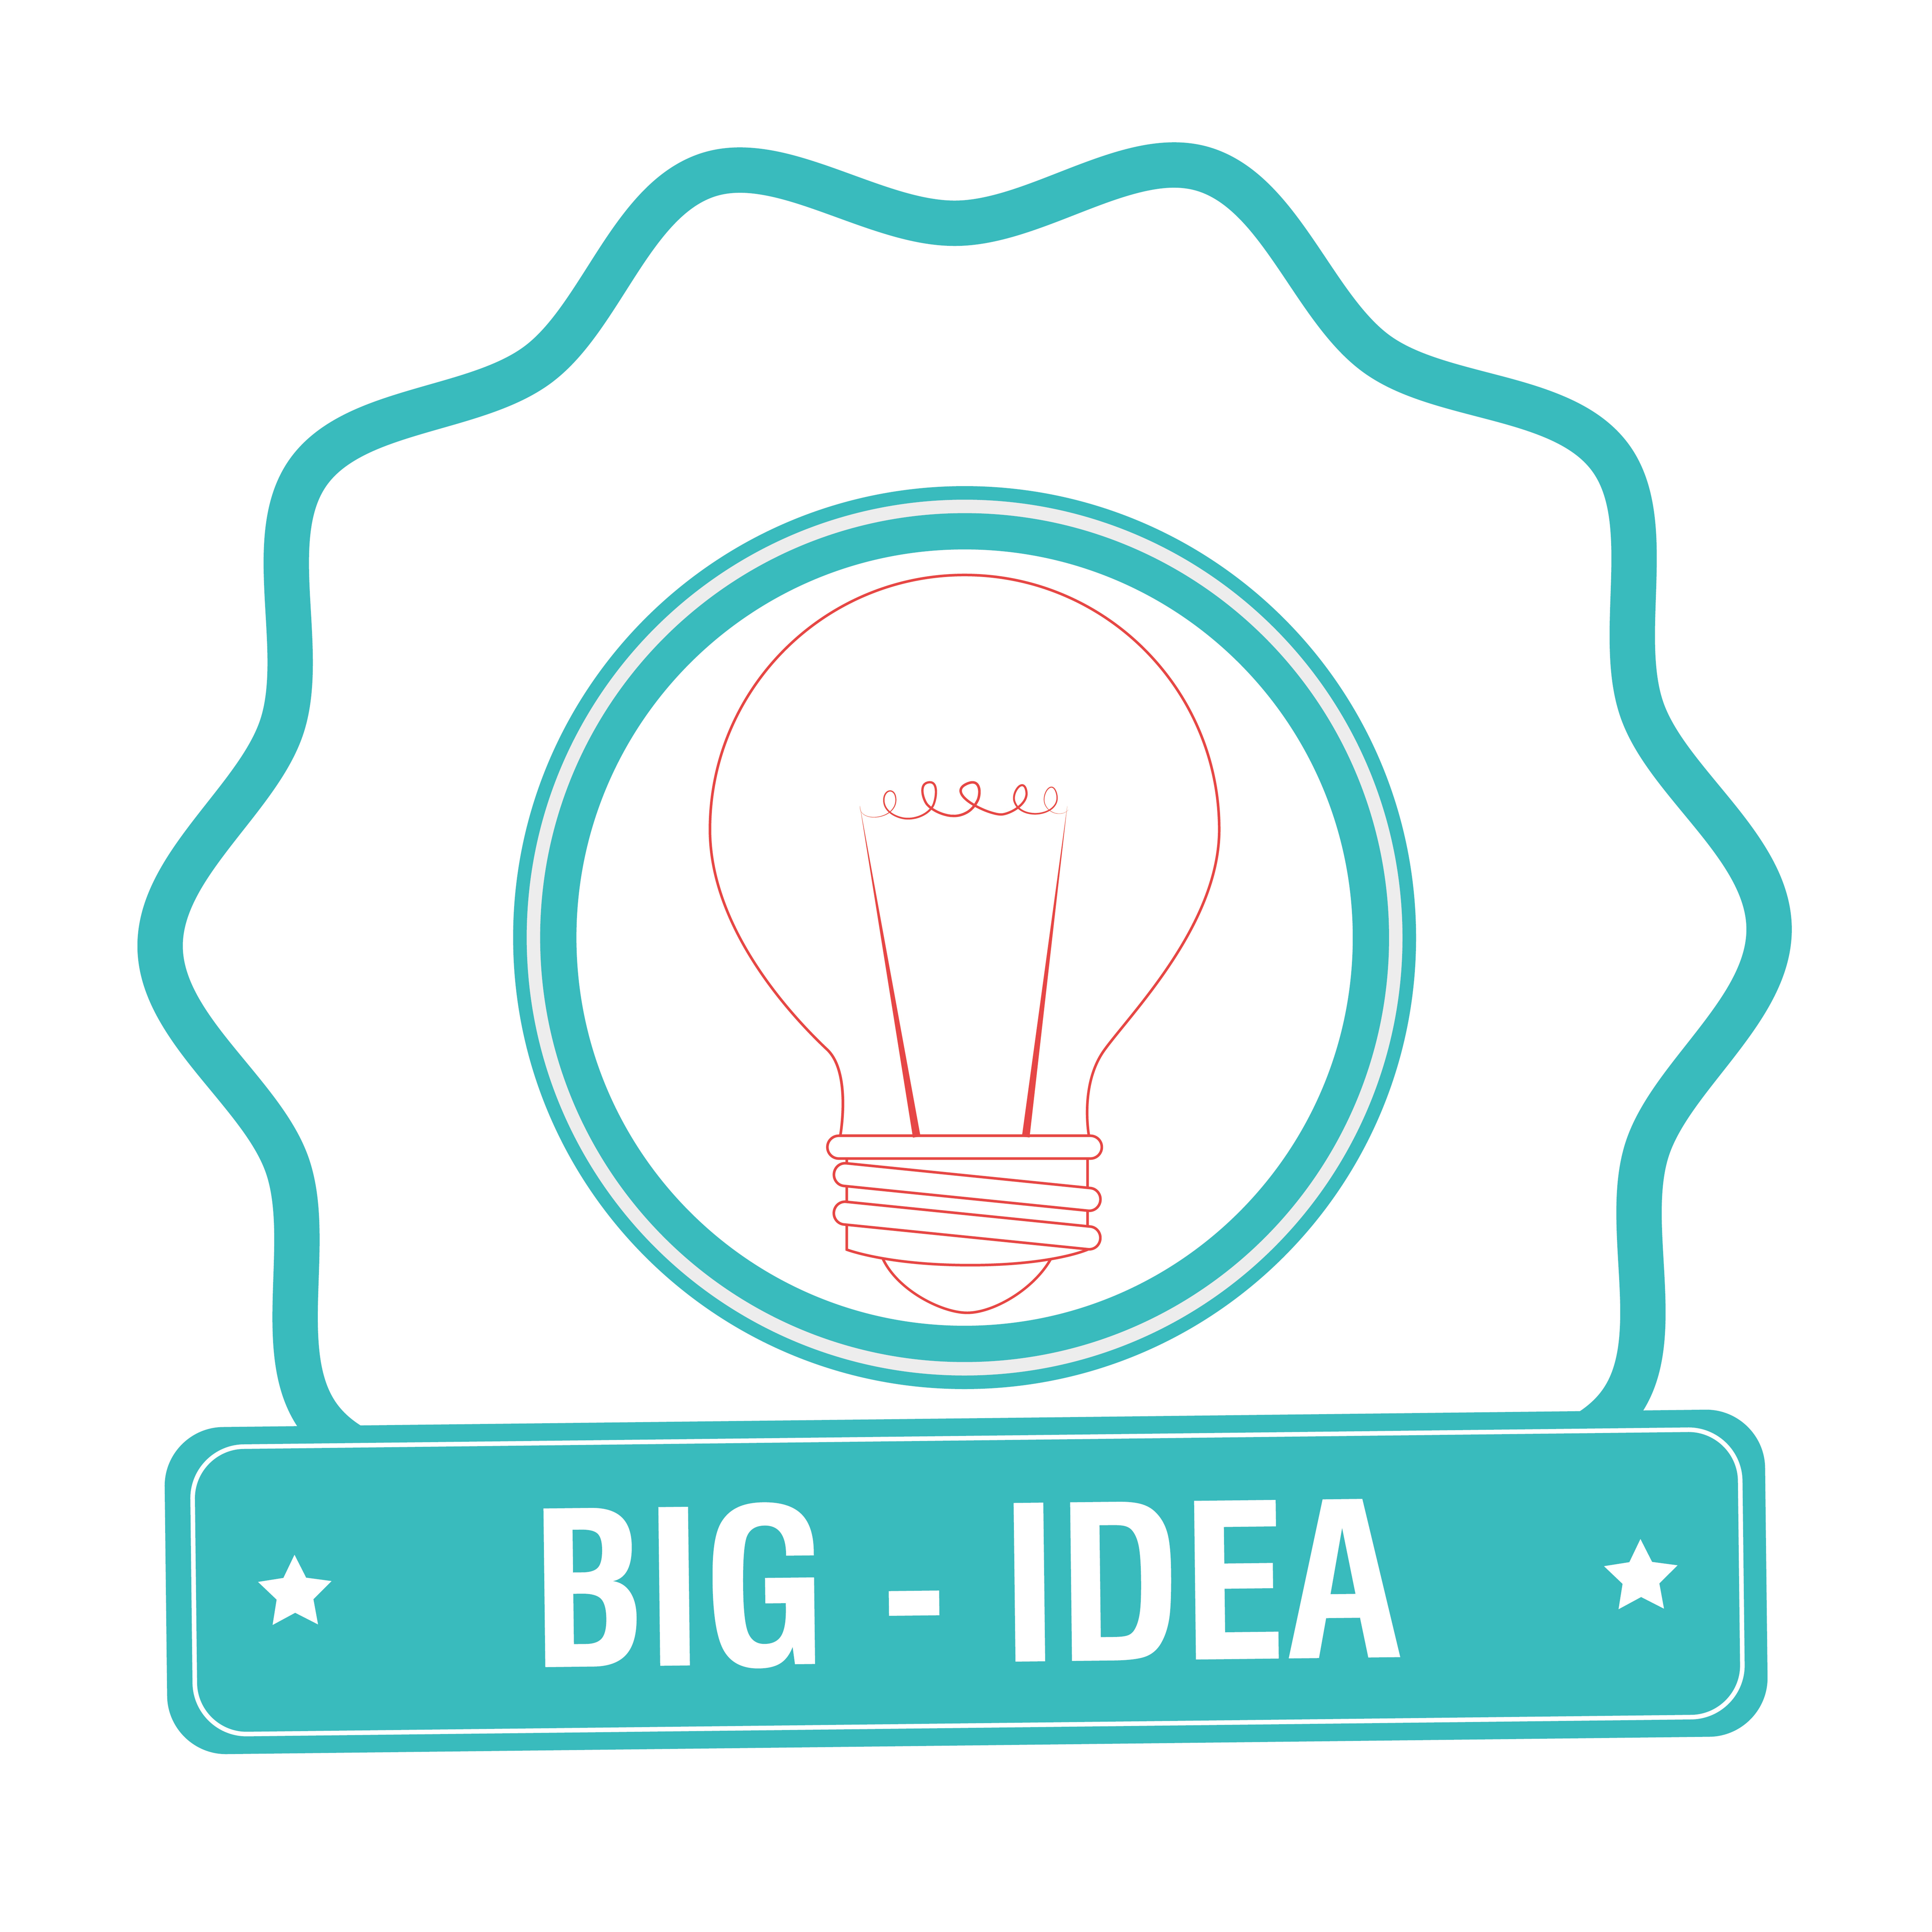 Image of bulb and the words big - idea